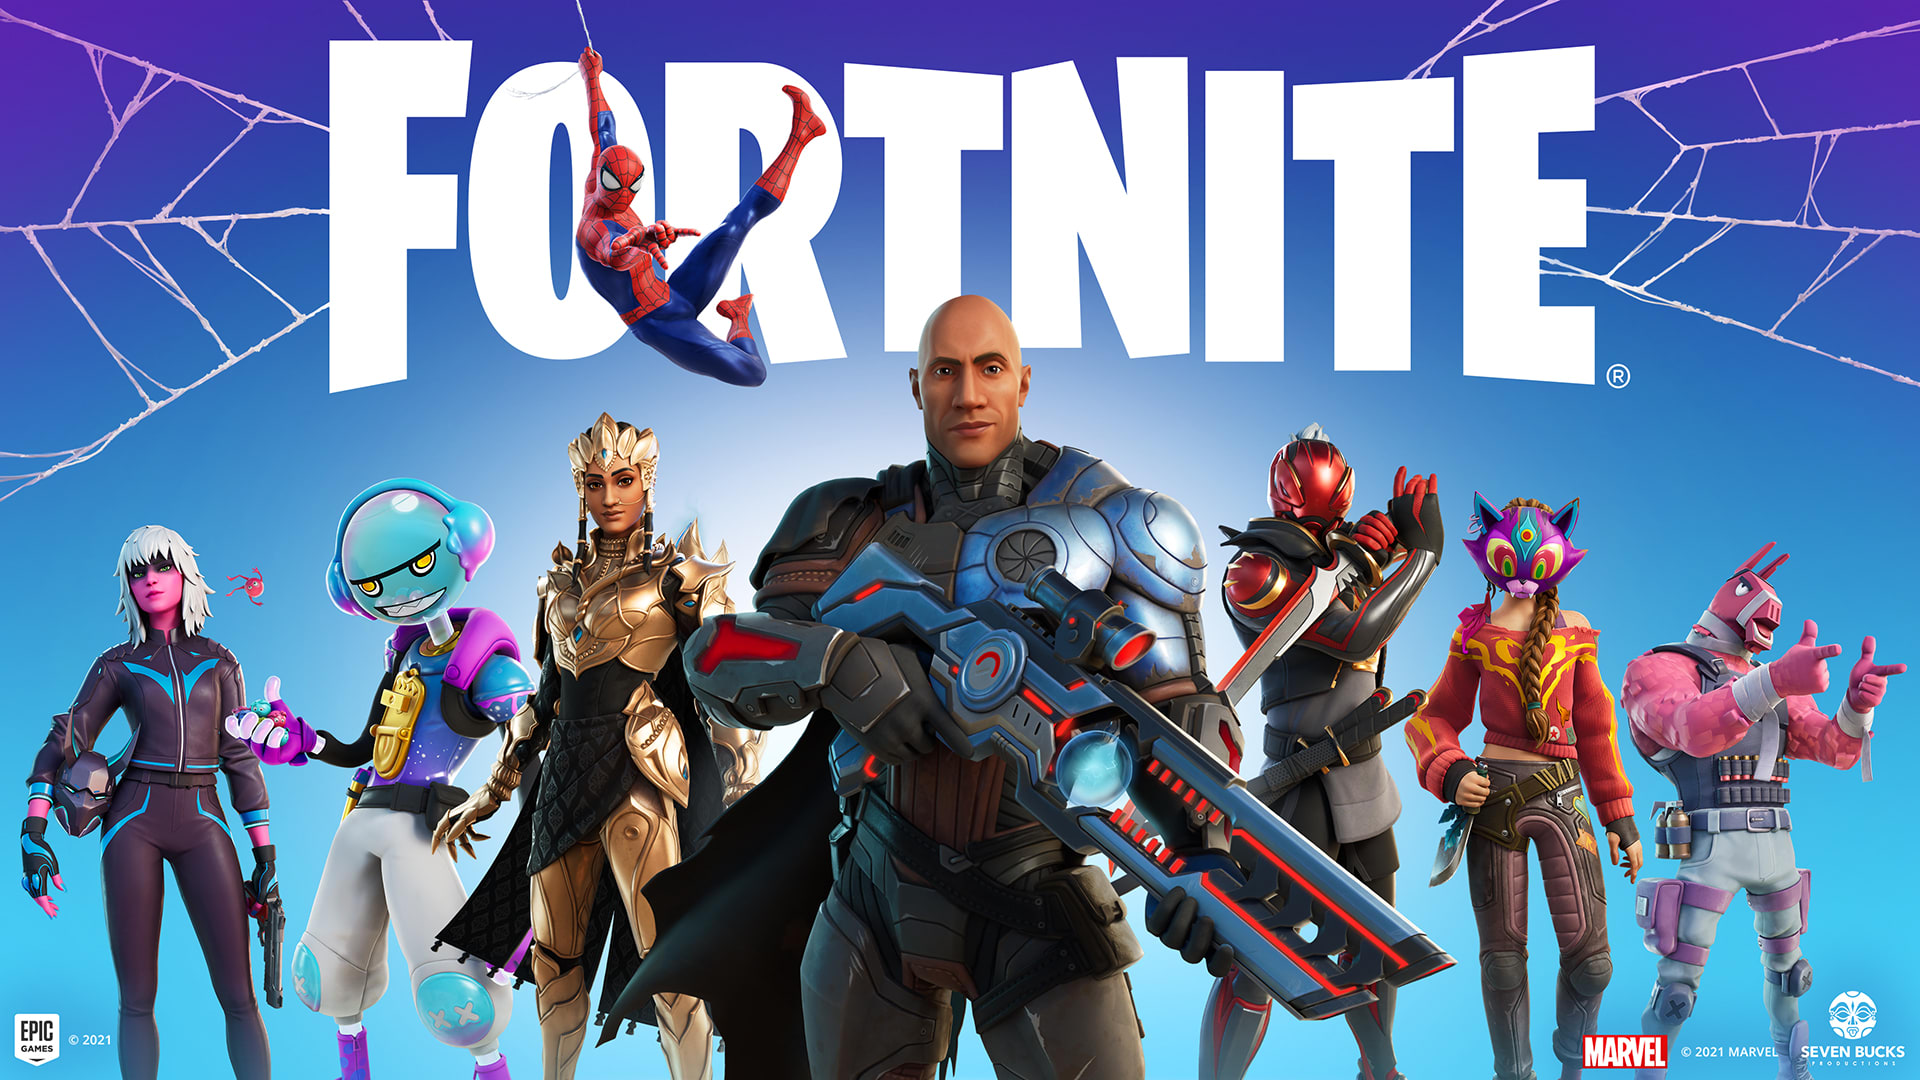 Fortnite Chapter 3 Season 1 Battle Pass Review: Ranking the Skins